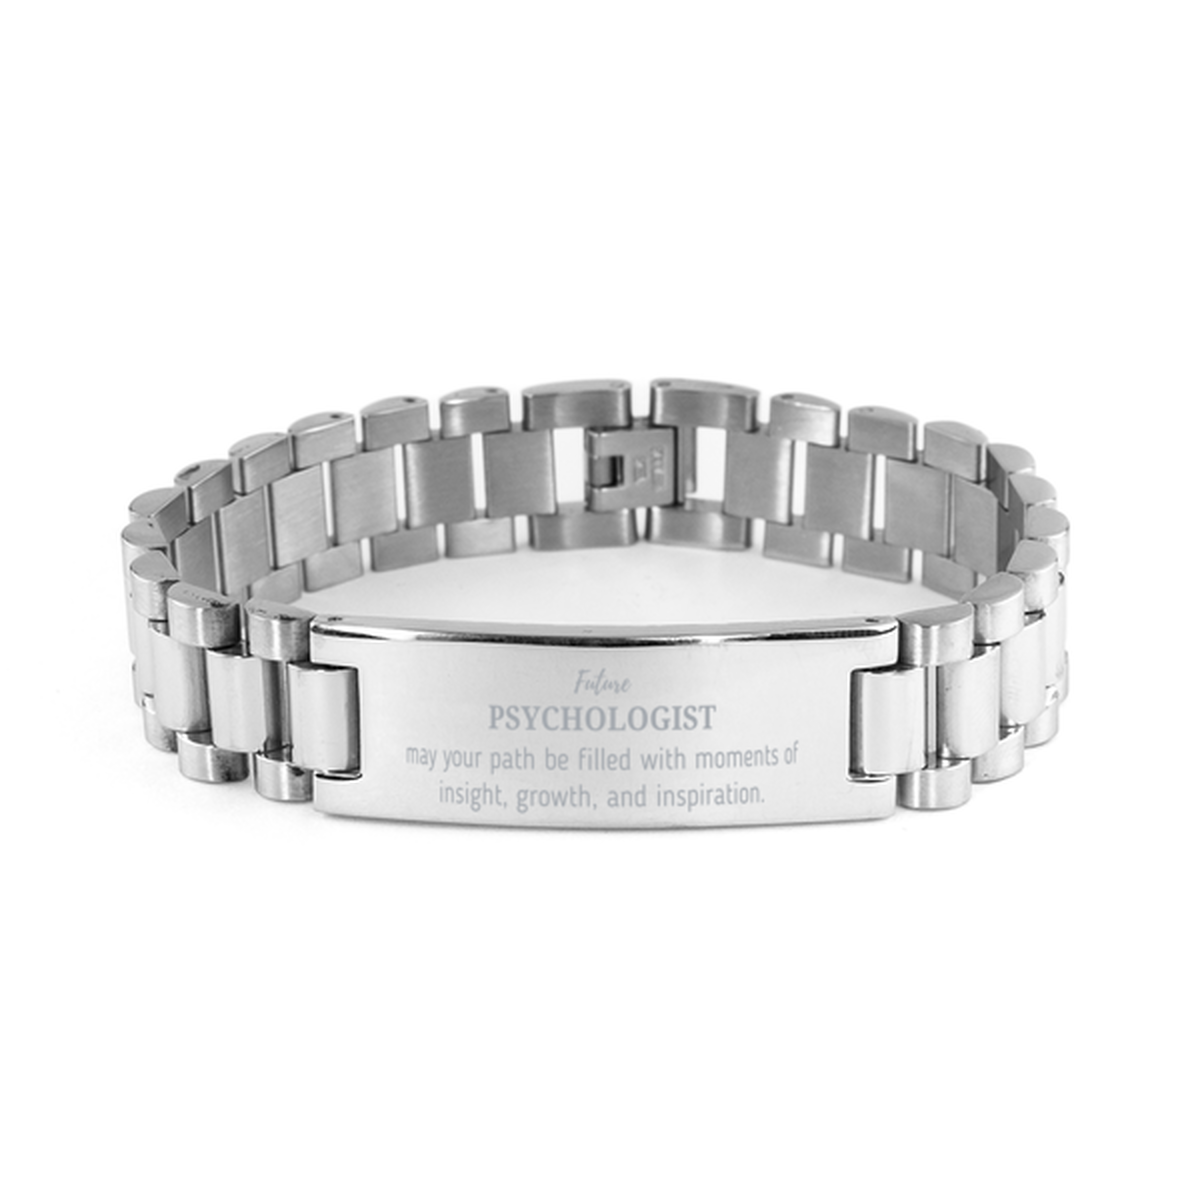 Future Psychologist Gifts, May your path be filled with moments of insight, Graduation Gifts for New Psychologist, Christmas Unique Ladder Stainless Steel Bracelet For Men, Women, Friends